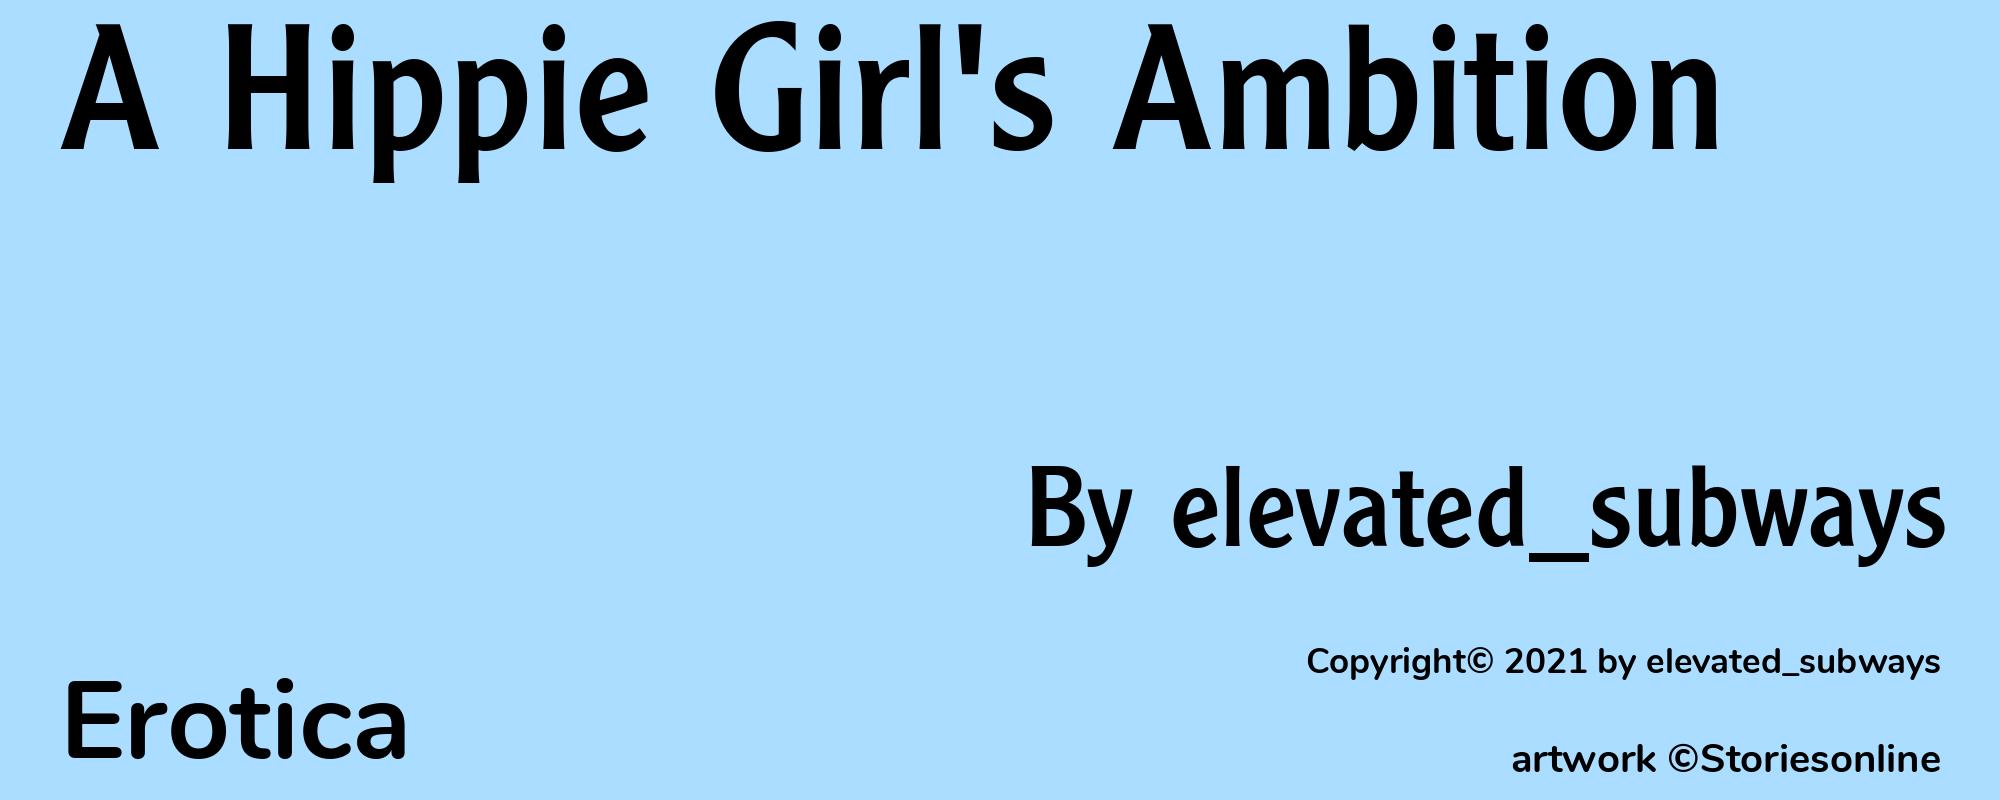 A Hippie Girl's Ambition - Cover